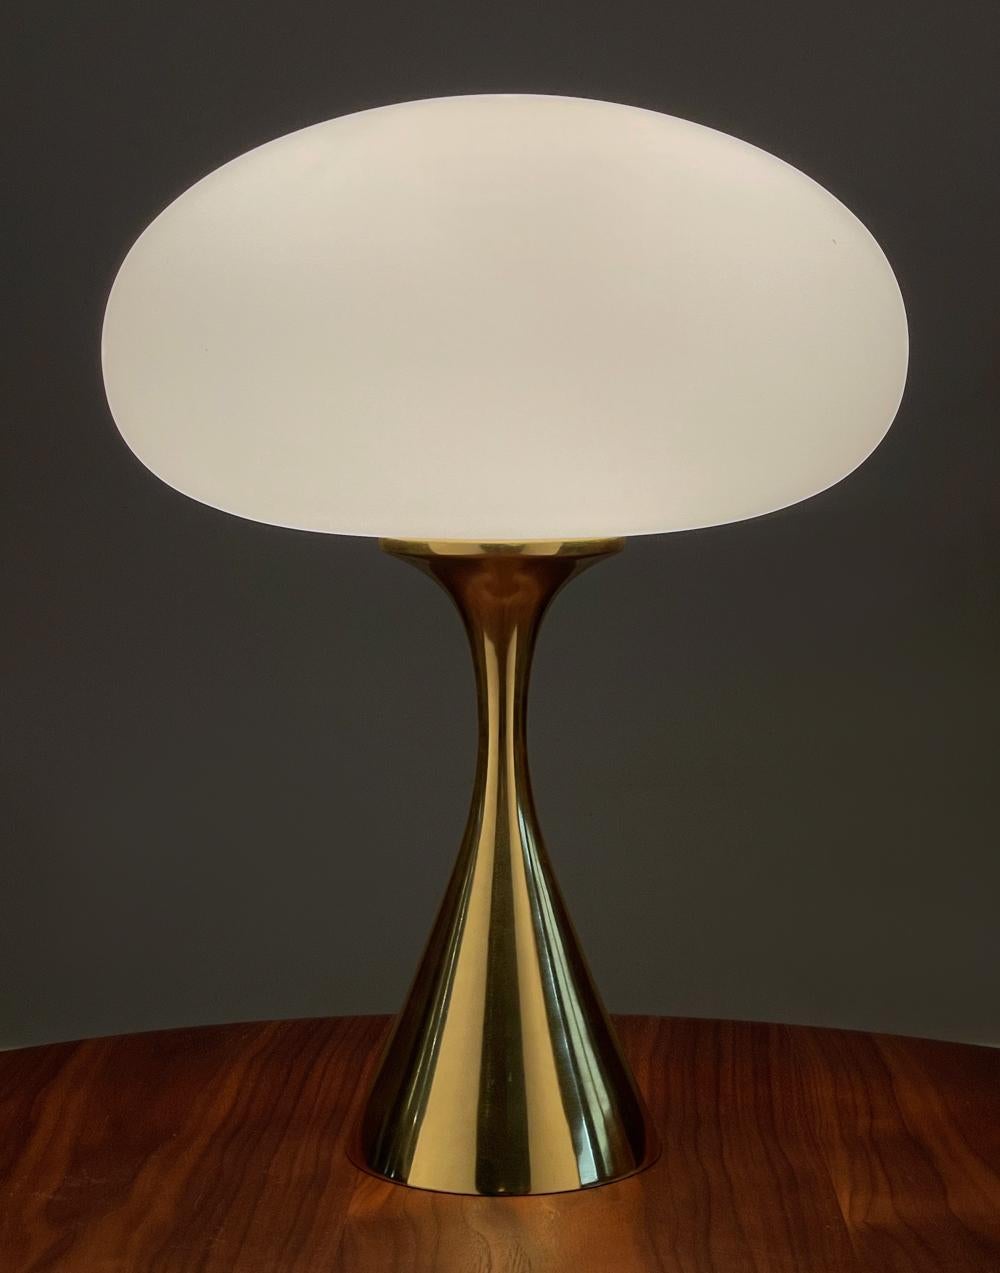 Aluminum Pair of Mid-Century Modern Table Lamps by Designline in Brass & White Glass For Sale